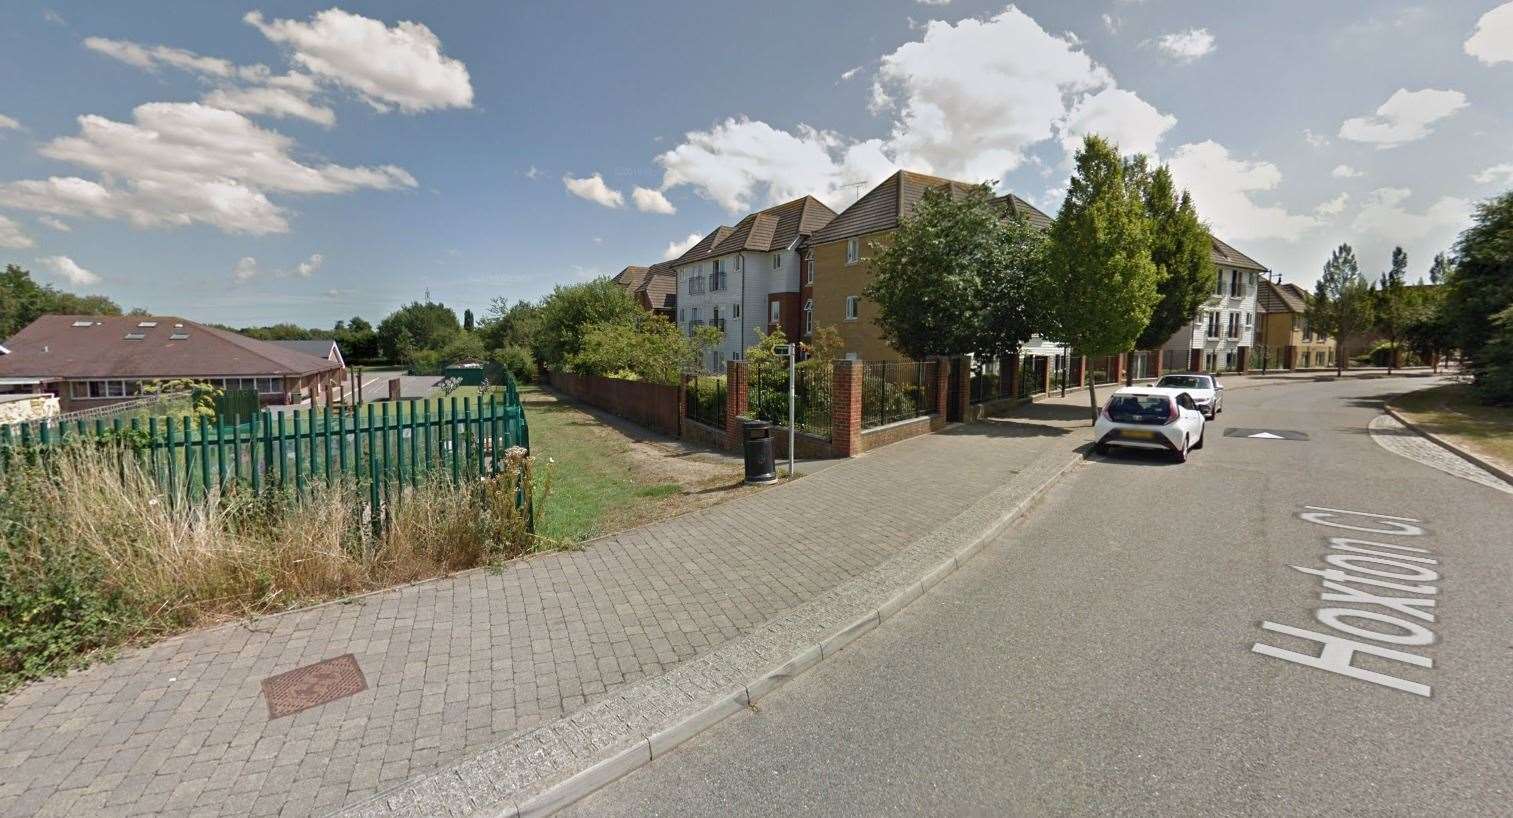 The woman's handbag was snatched on Hoxton Close as she waited for a friend. Picture: Google (14282269)